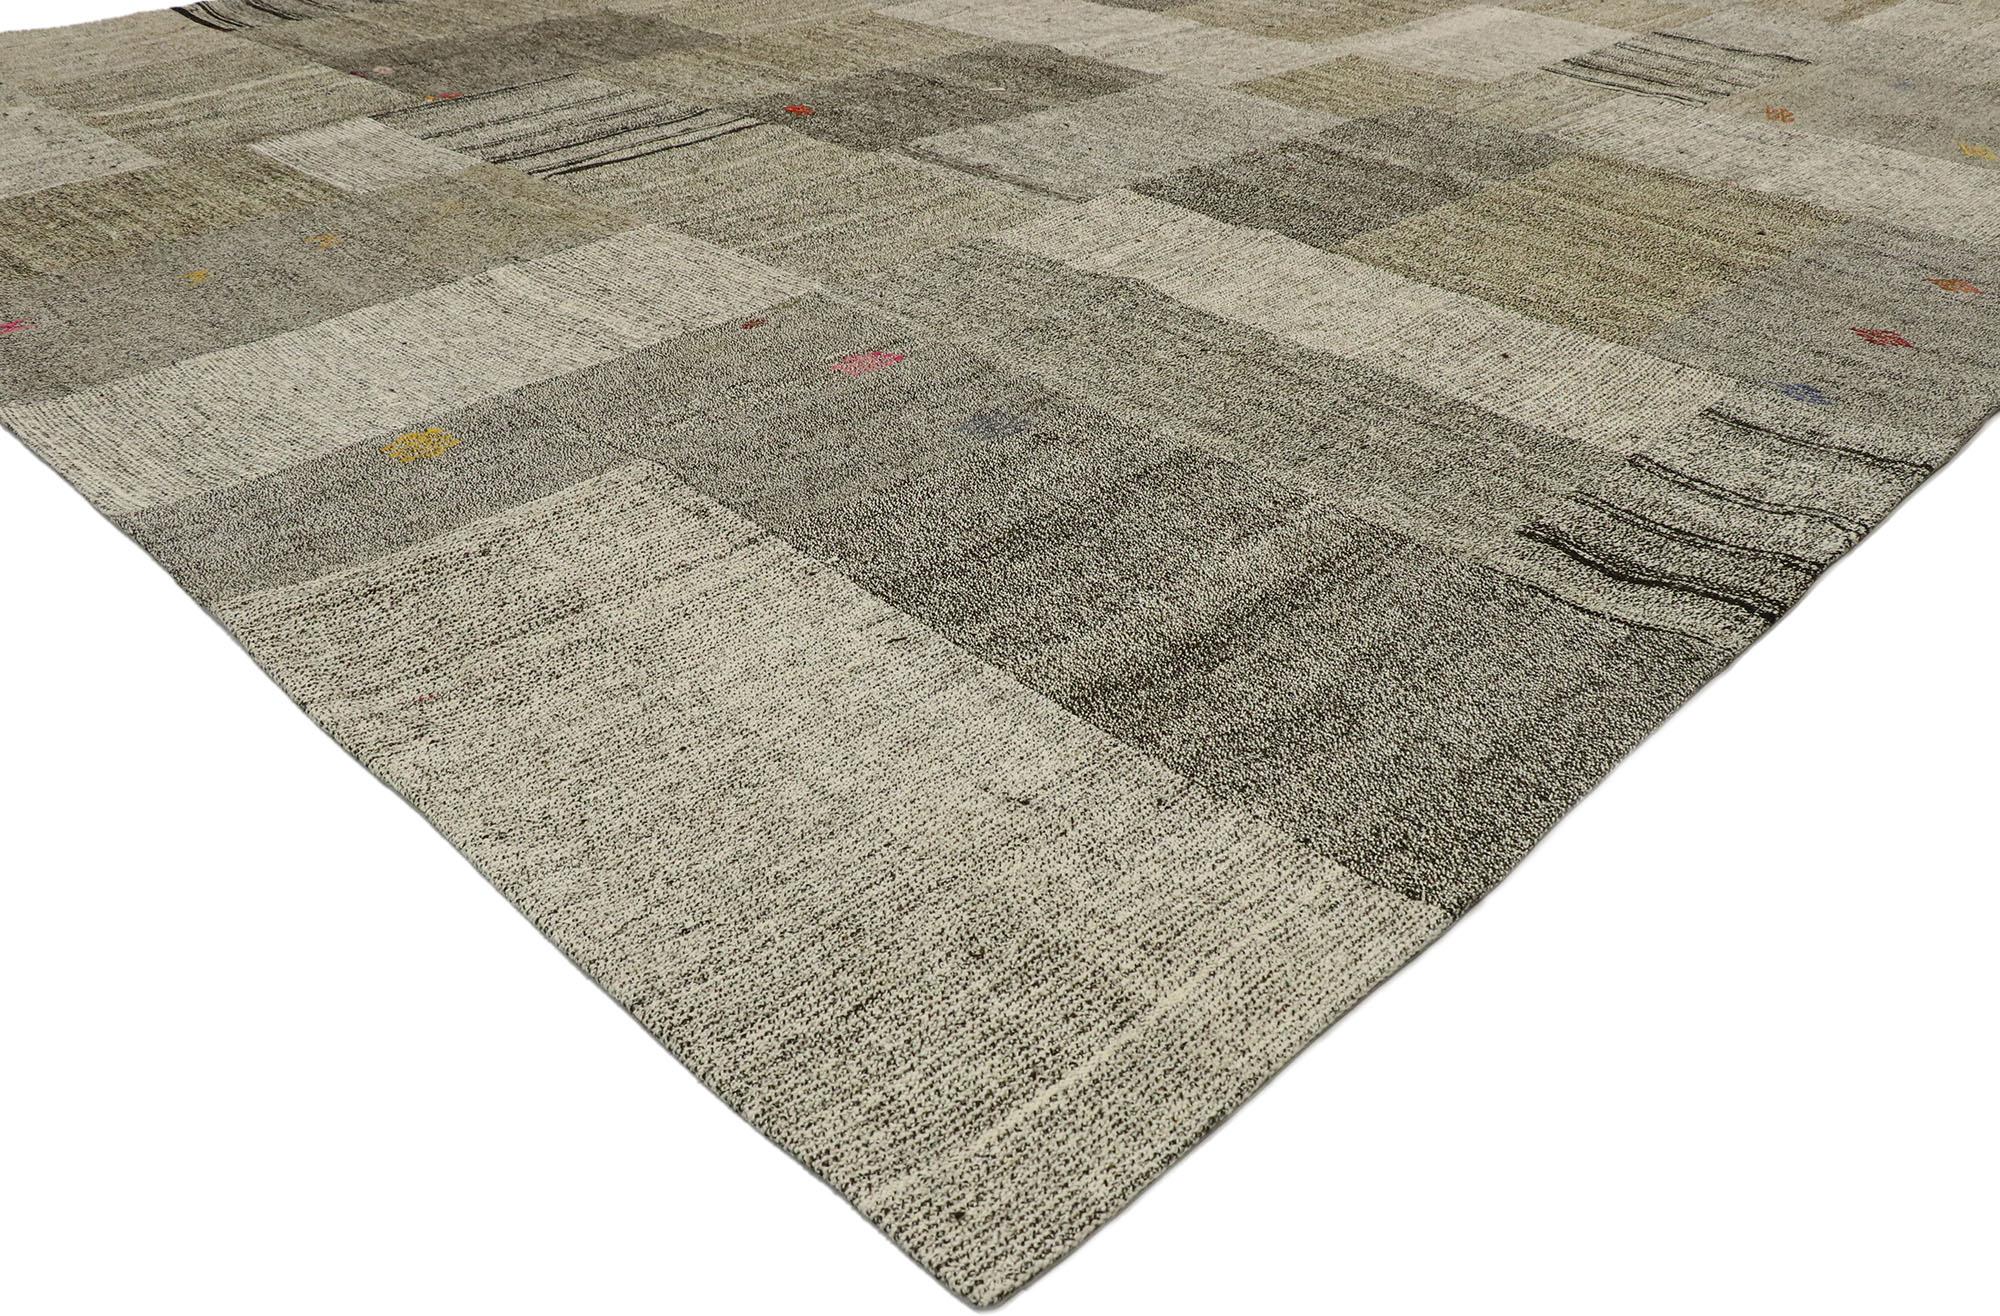 53167, vintage Turkish Patchwork Kilim rug with Scandinavian Modern style. Featuring well-balanced asymmetry with a simple design aesthetic, this handwoven Turkish Patchwork Kilim rug adds texture and subtle graphic appeal forming a warm, relaxed